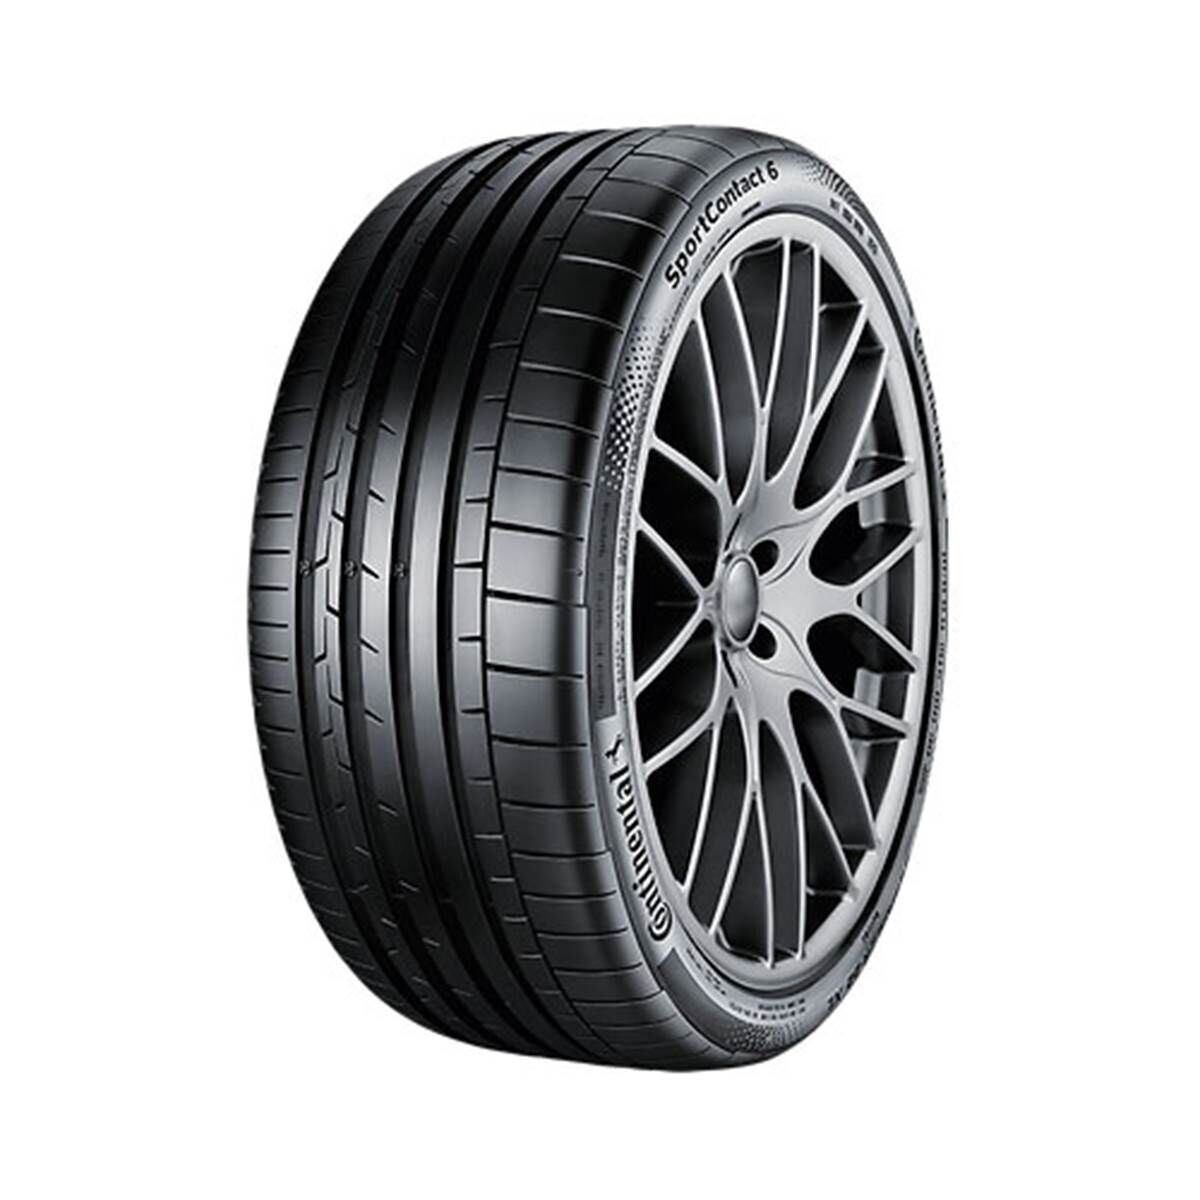 Continental Neumático  Sportcontact 6 OPE 245/35R20 95Y